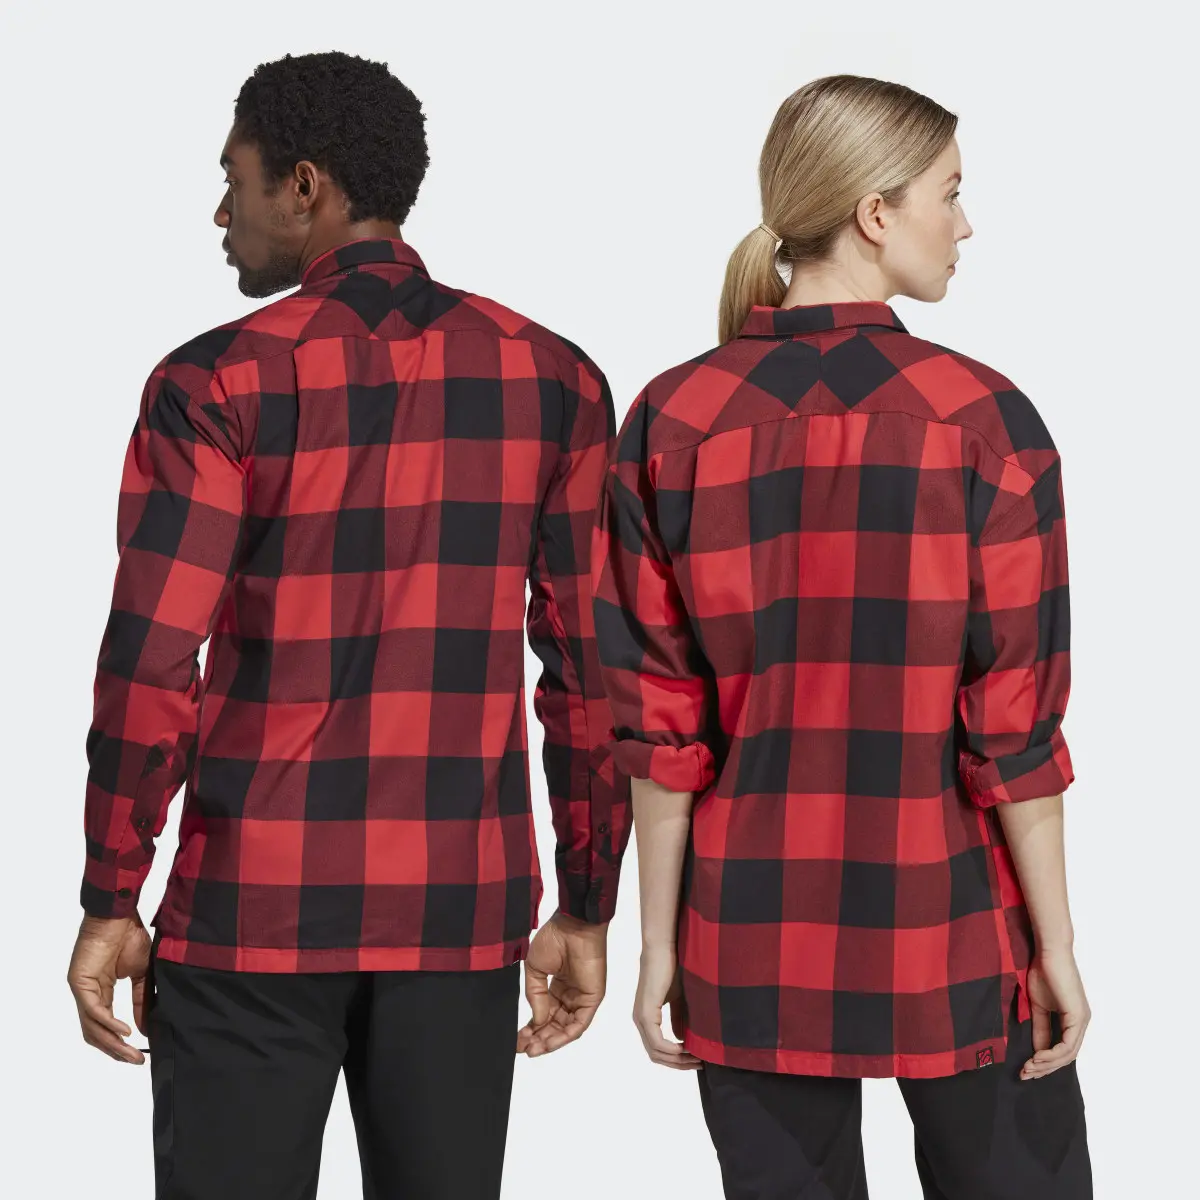 Adidas Five Ten Brand of the Brave Flannel Shirt (uniseks). 2